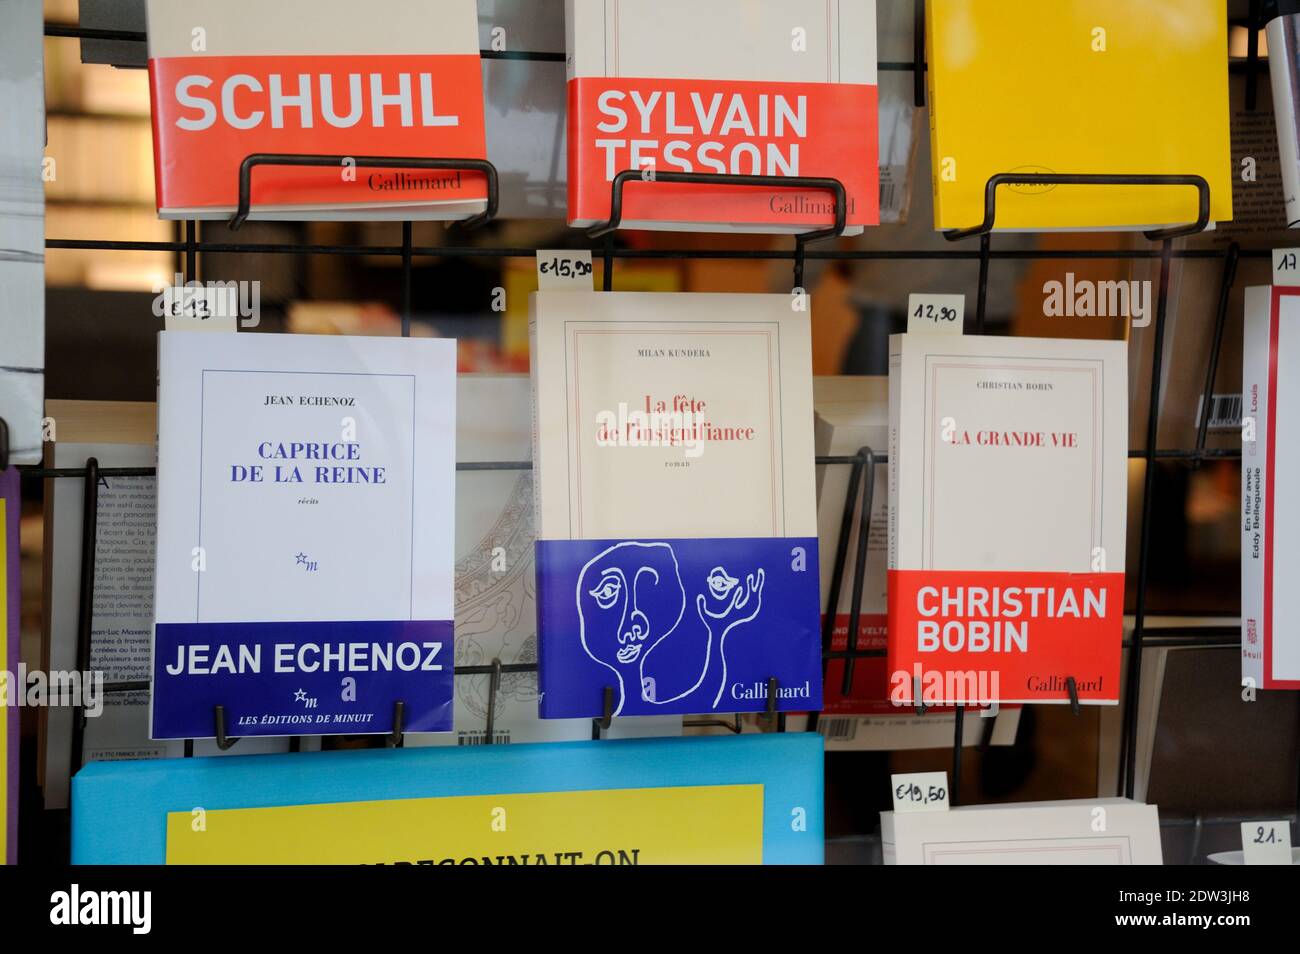 Illustration of the Milan Kundera new book 'La Fete de l'Insignifiance' in Paris, France on April 03, 2014. Photo by Alban Wyters/ABACAPRESS.COM Stock Photo